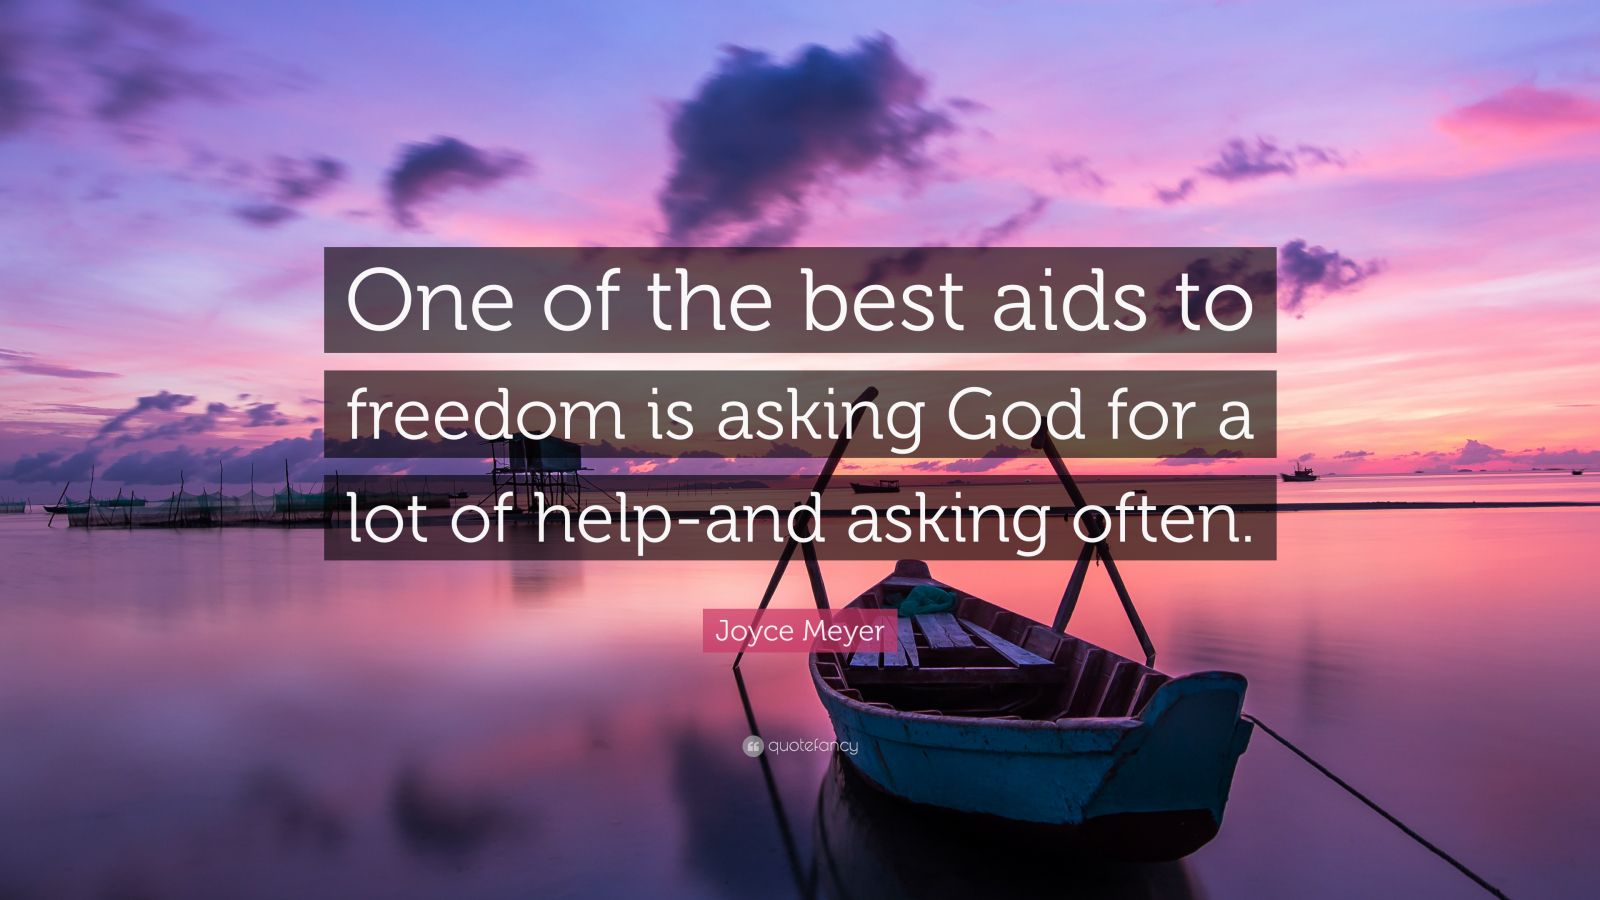 Joyce Meyer Quote: “One of the best aids to freedom is asking God for a ...